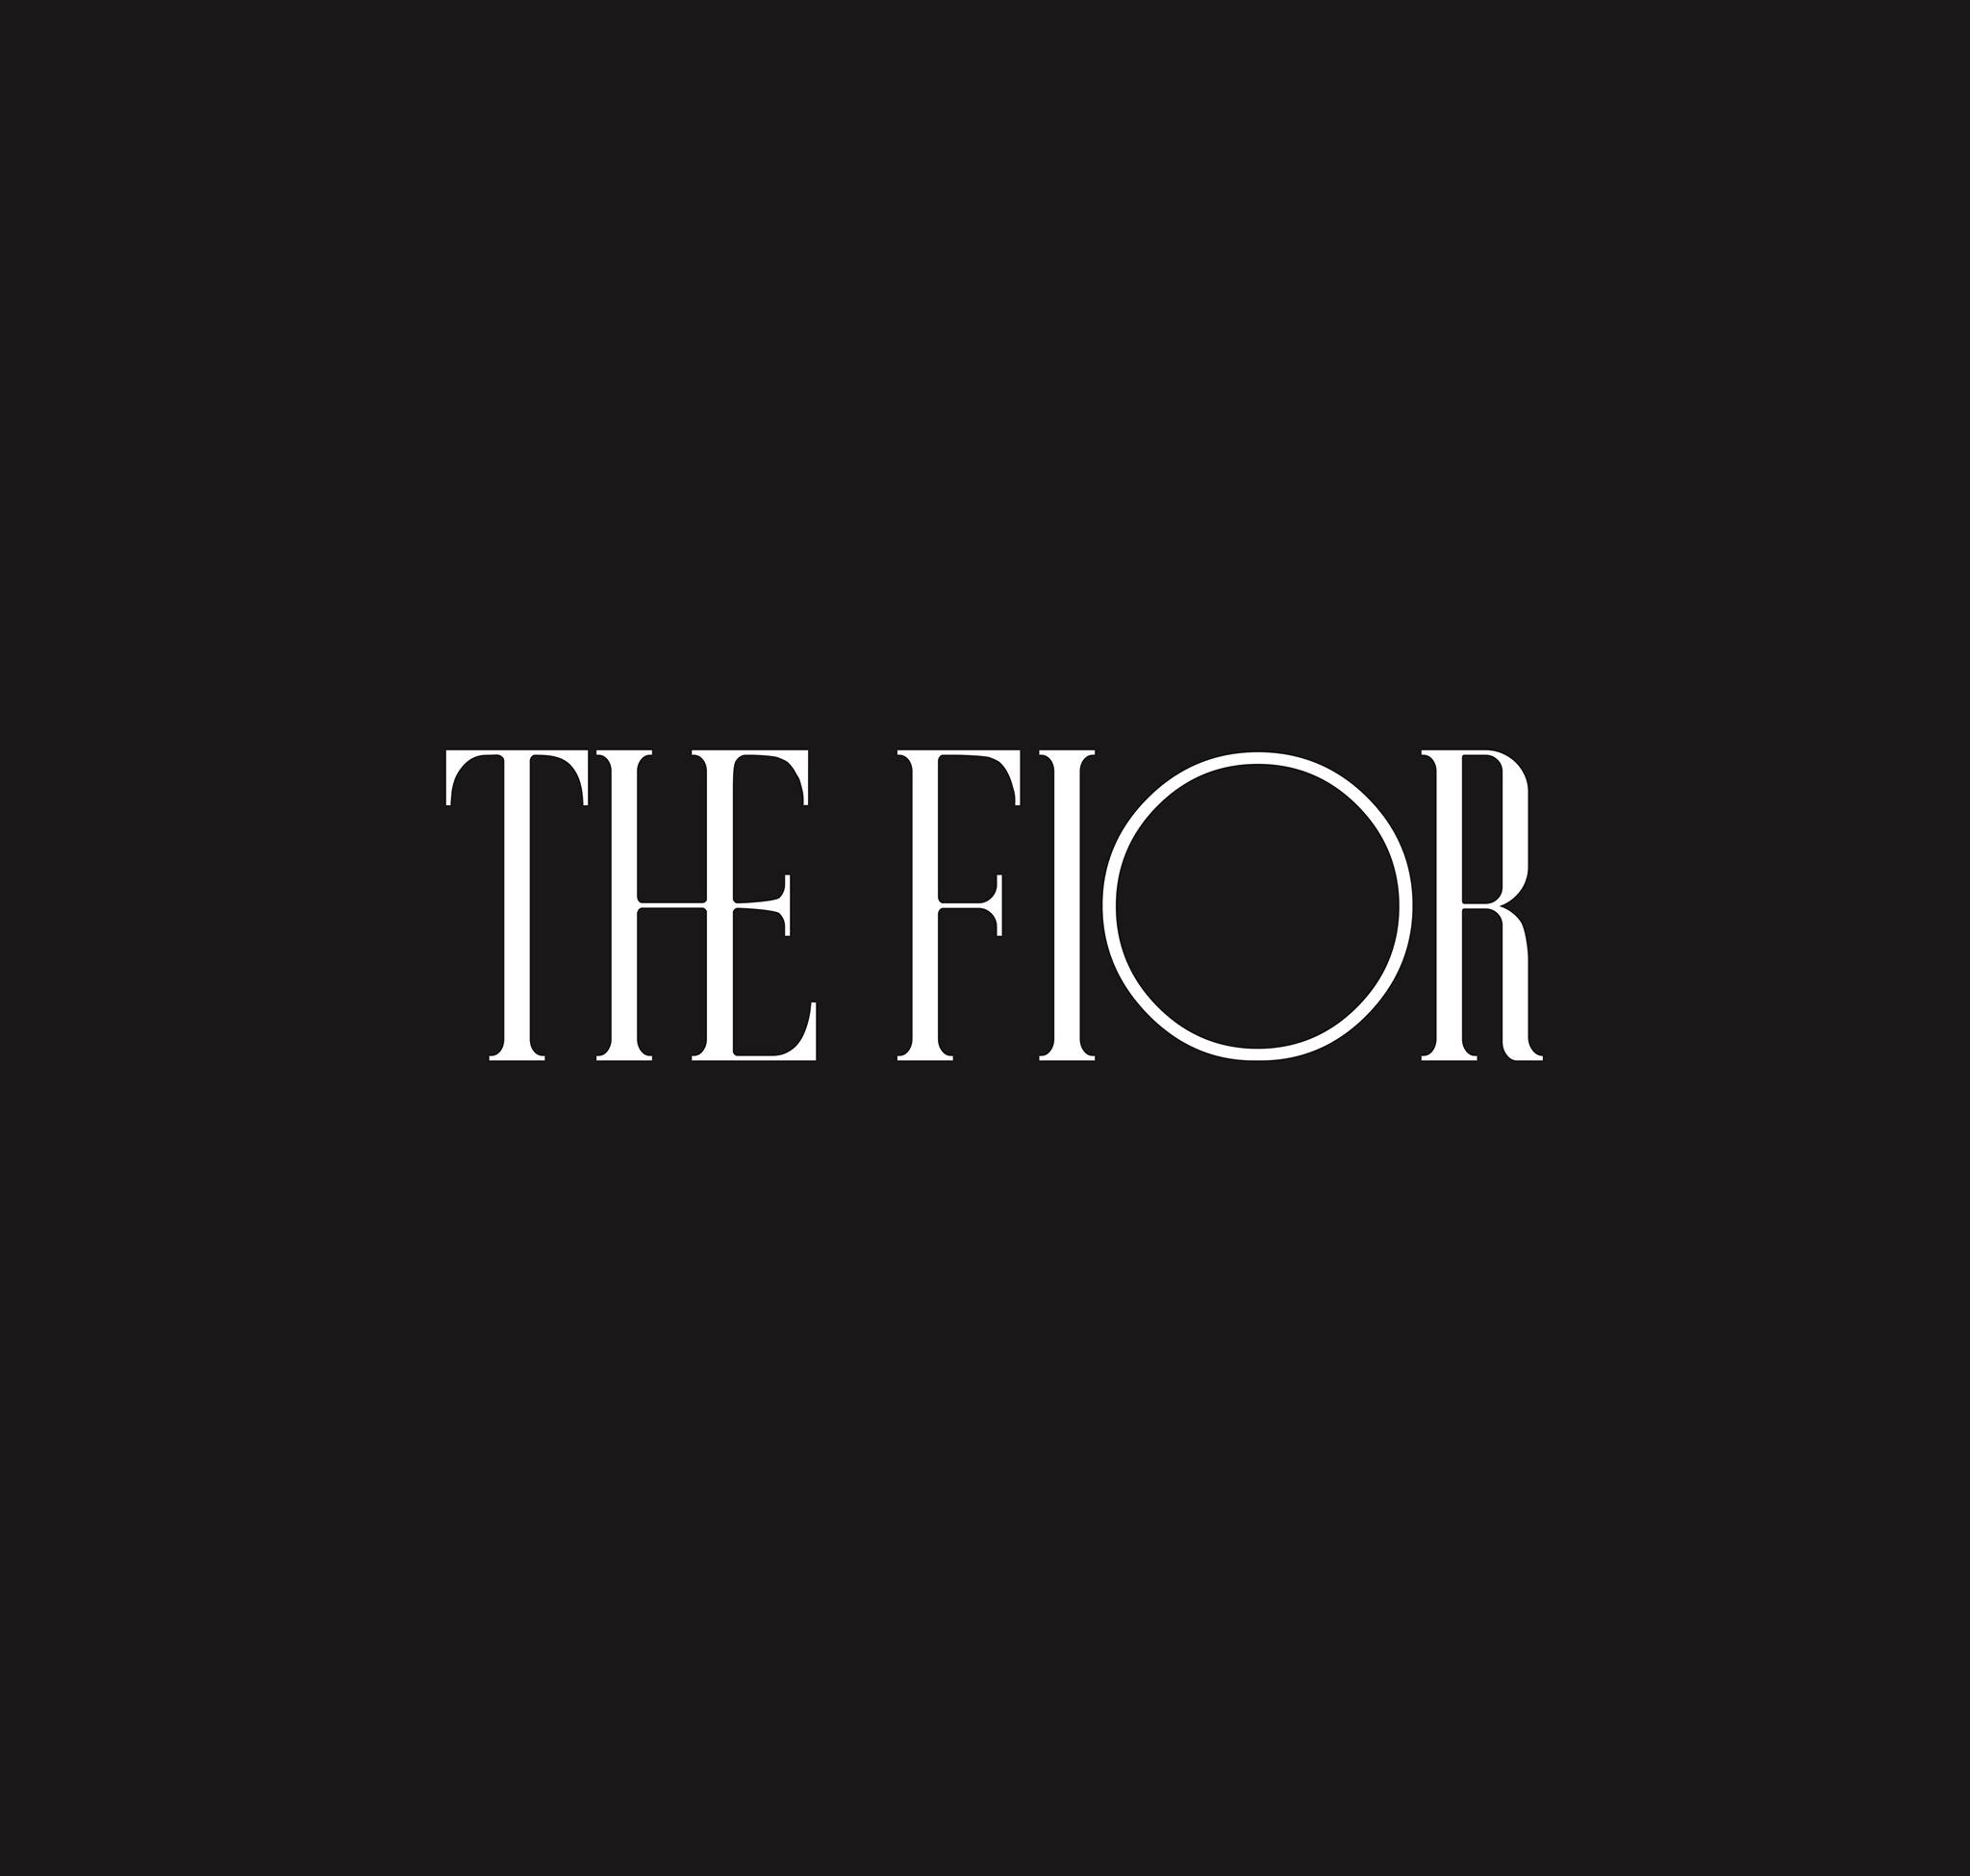 Moshpit Interviews Grassroots Indie-Rock Band - The Fior